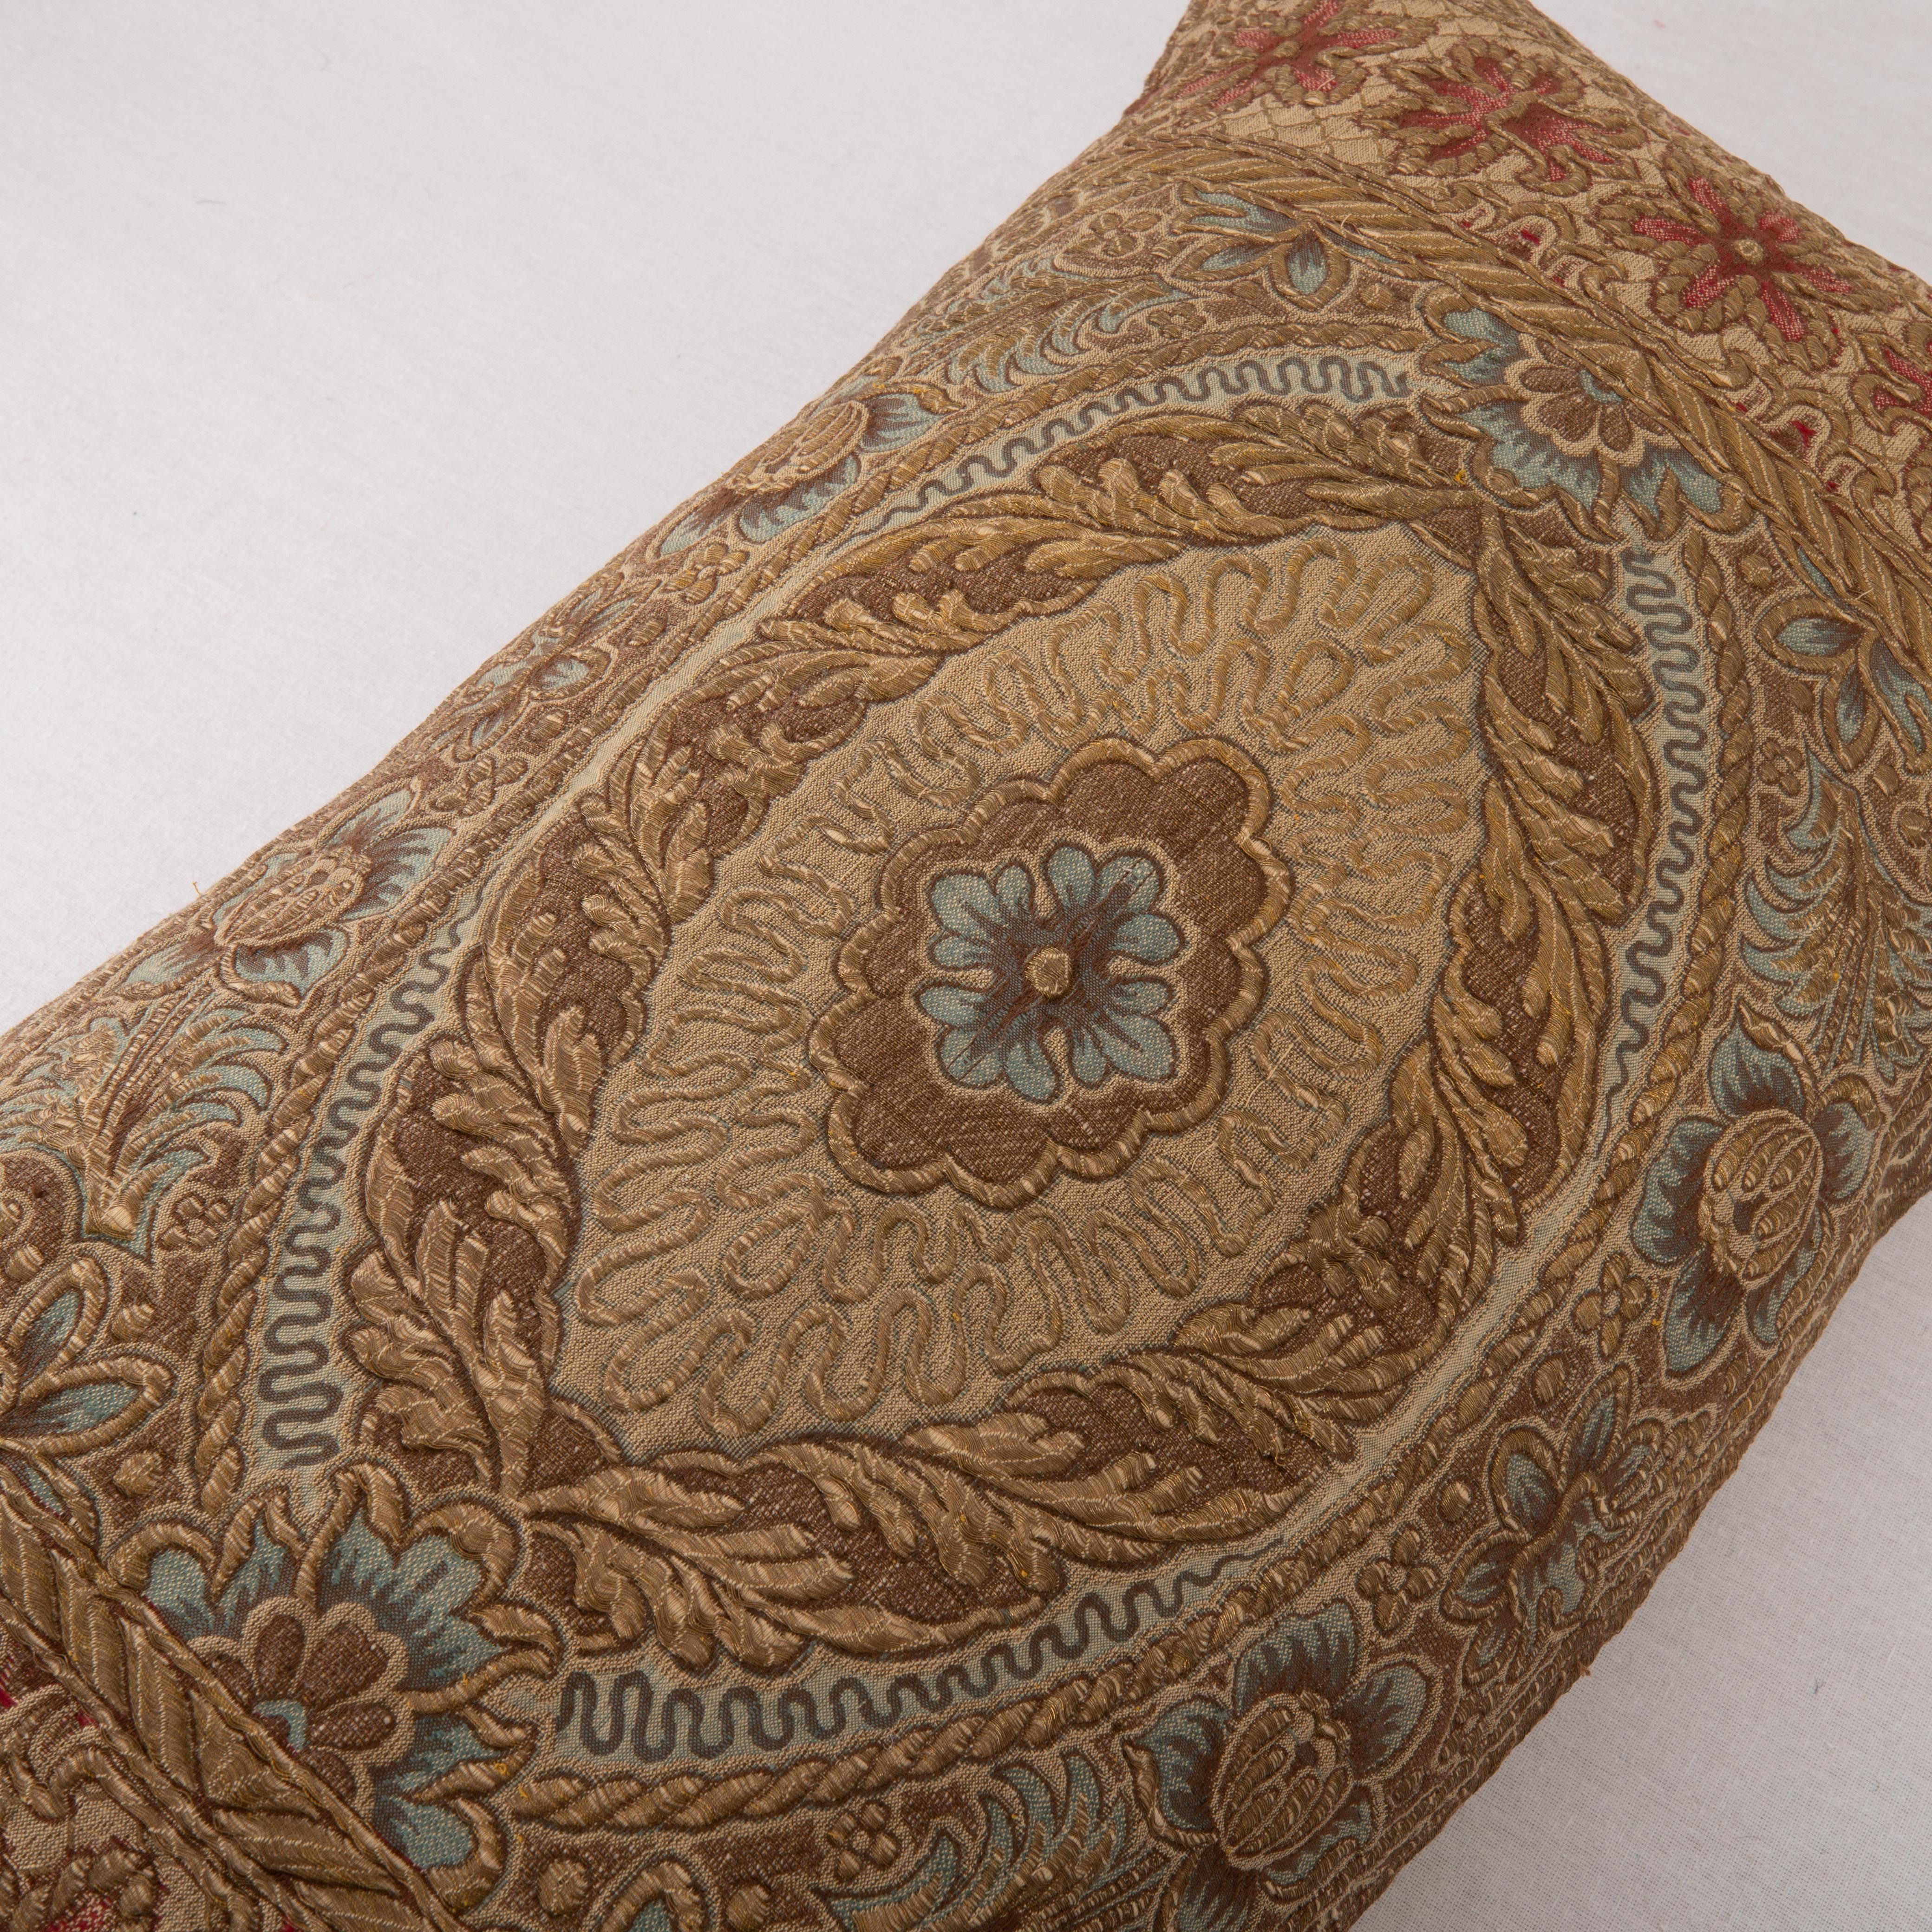 20th Century Pillow Cover Made from an early 20th C. Italian Embroidery For Sale